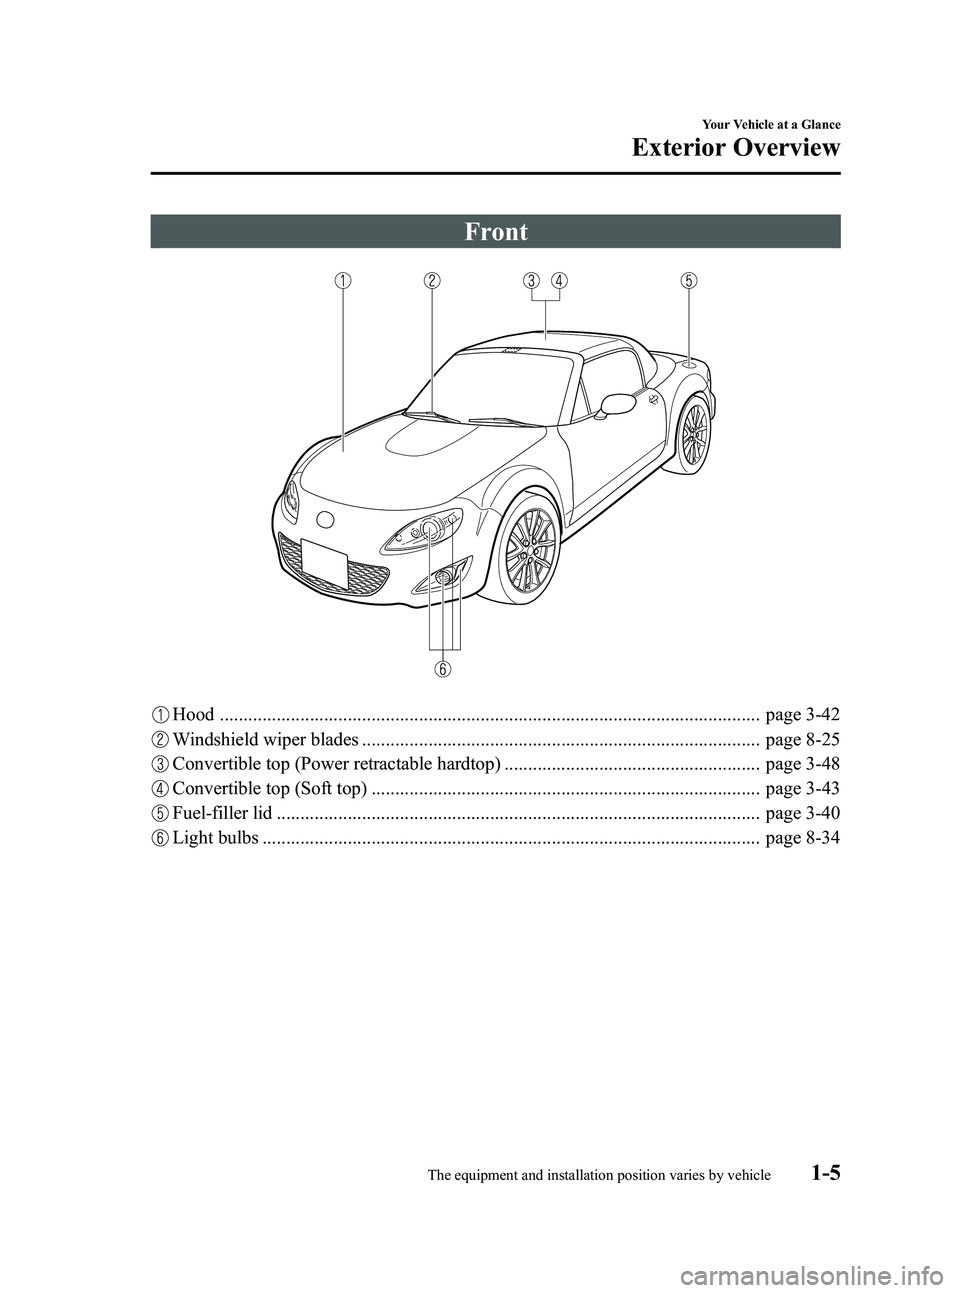 MAZDA MODEL MX-5 MIATA POWER RETRACTABLE HARDTOP 2009  Owners Manual Black plate (11,1)
Front
Hood .................................................................................................................. page 3-42
Windshield wiper blades .....................